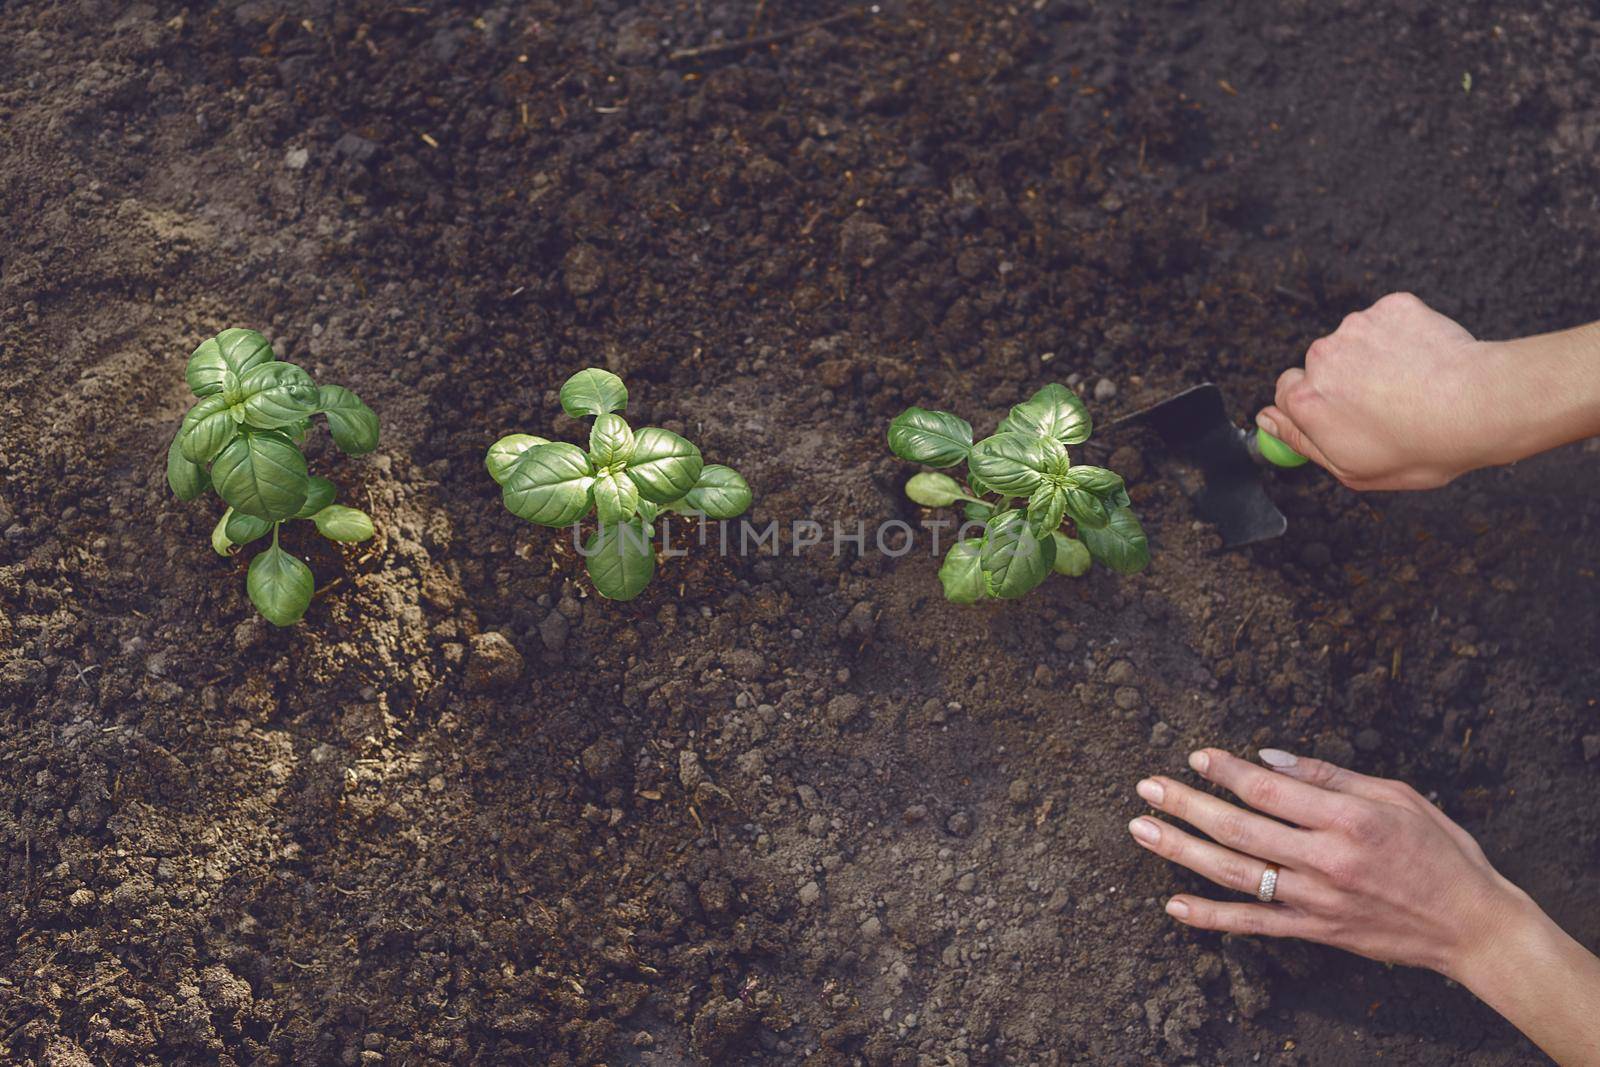 Hands of unrecognizable woman agronomist are digging by small garden shovel, planting green basil sprouts or plants in fertilized black ground. Organic eco gardening. Sunny day. Close-up, top view